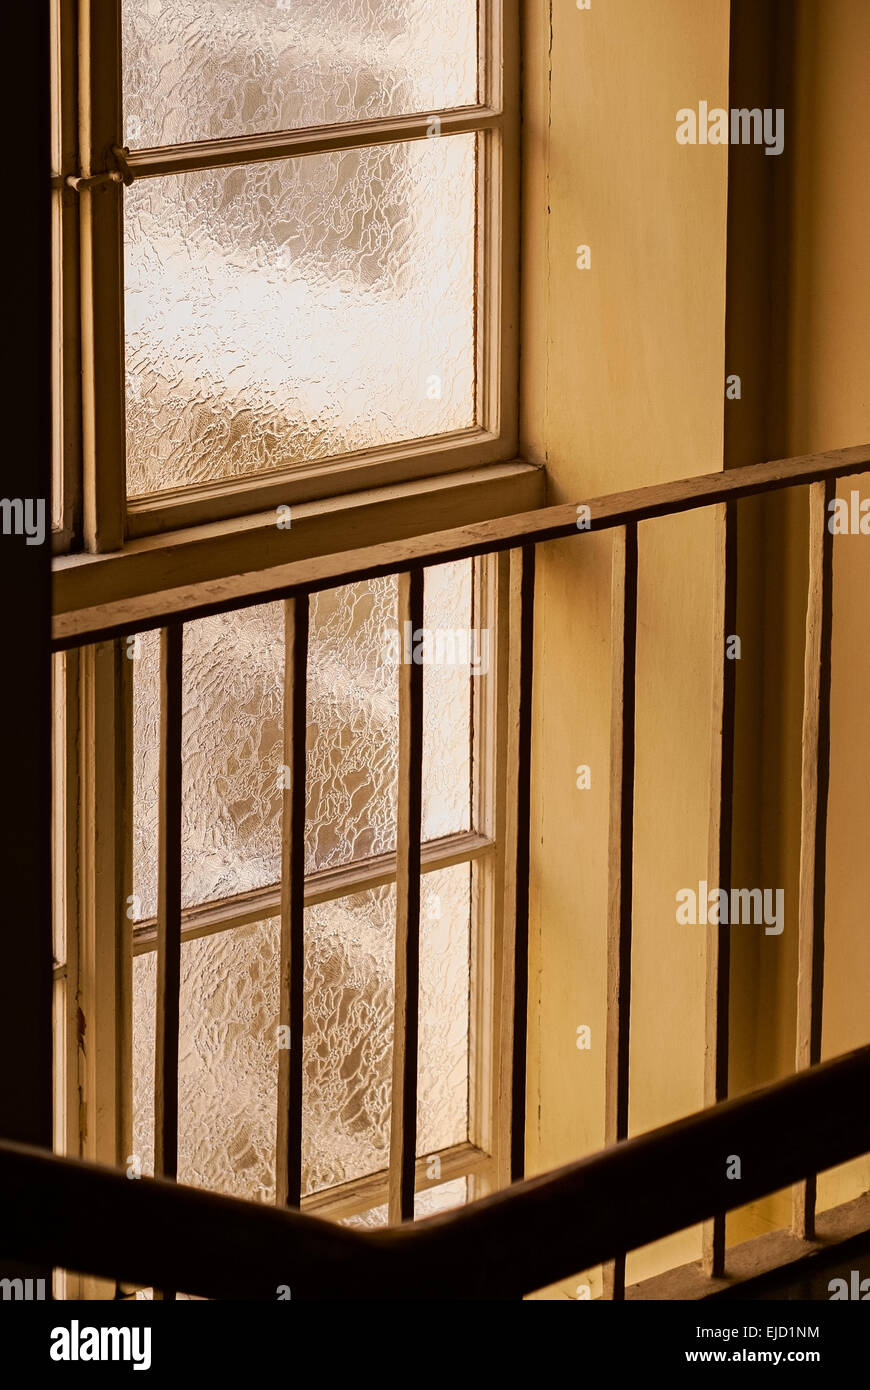 The old textured window. close-up Stock Photo